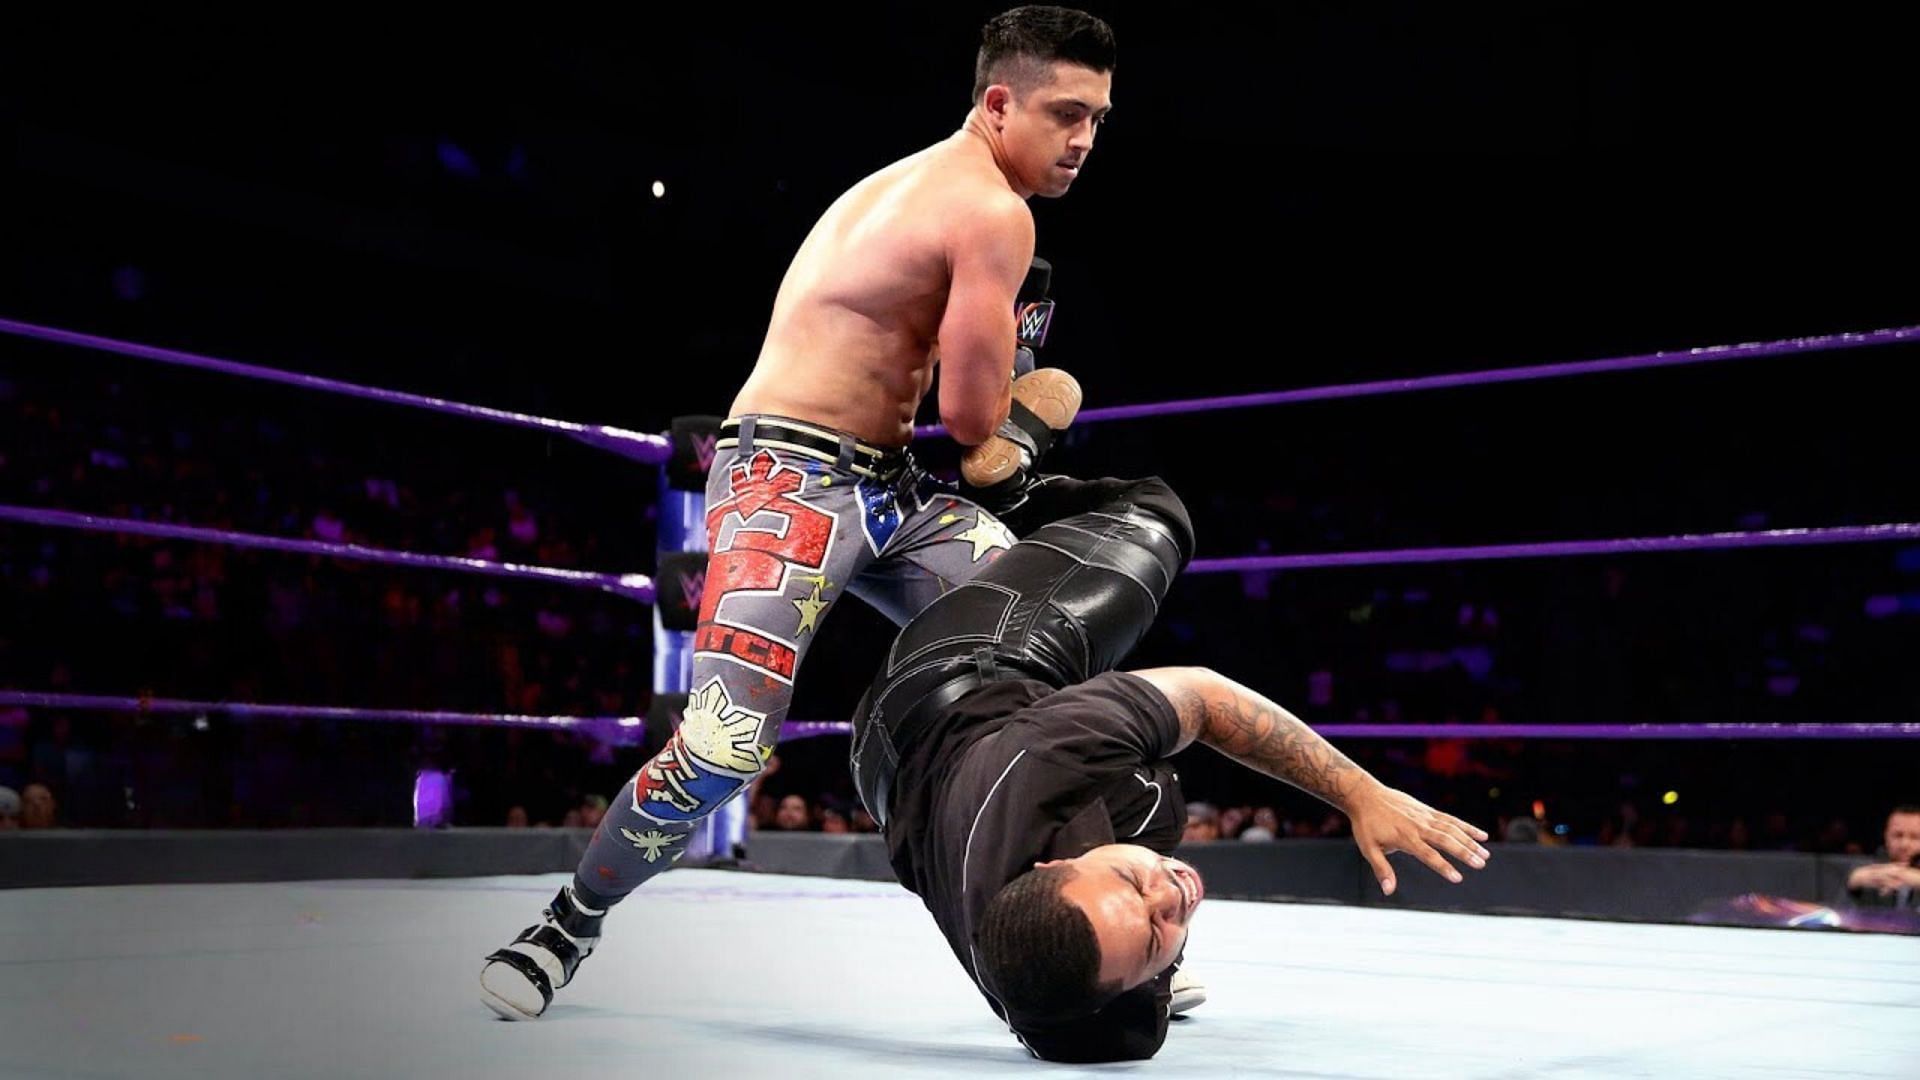 Bryan Keith once faced TJ Perkins on 205 Live